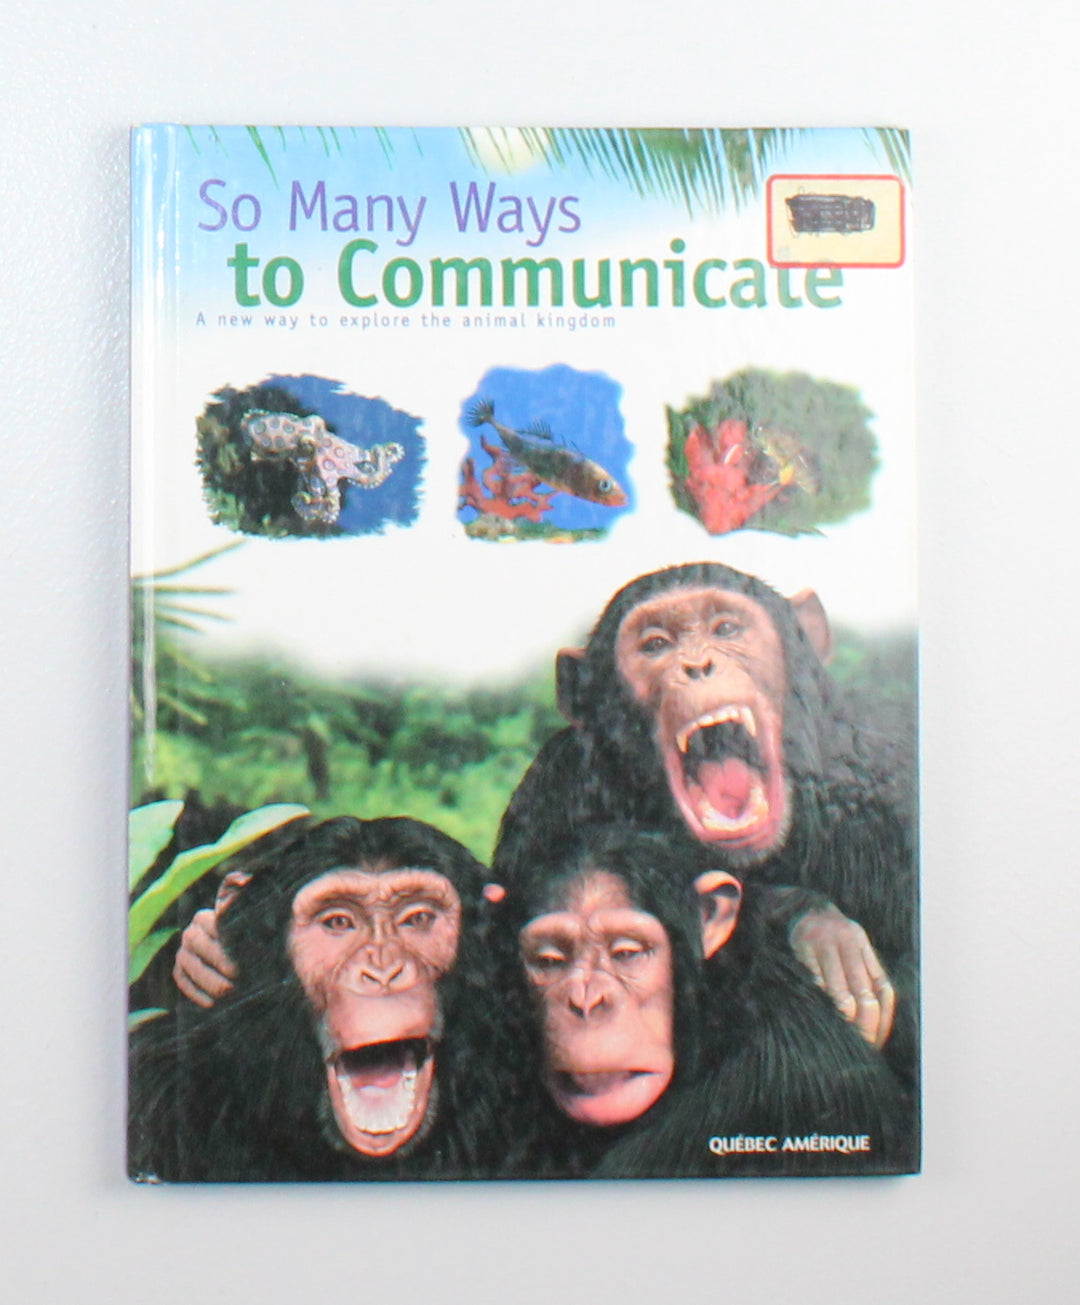 SO MANY WAYS TO COMMUNICATE HARDCOVER BOOK VGUC